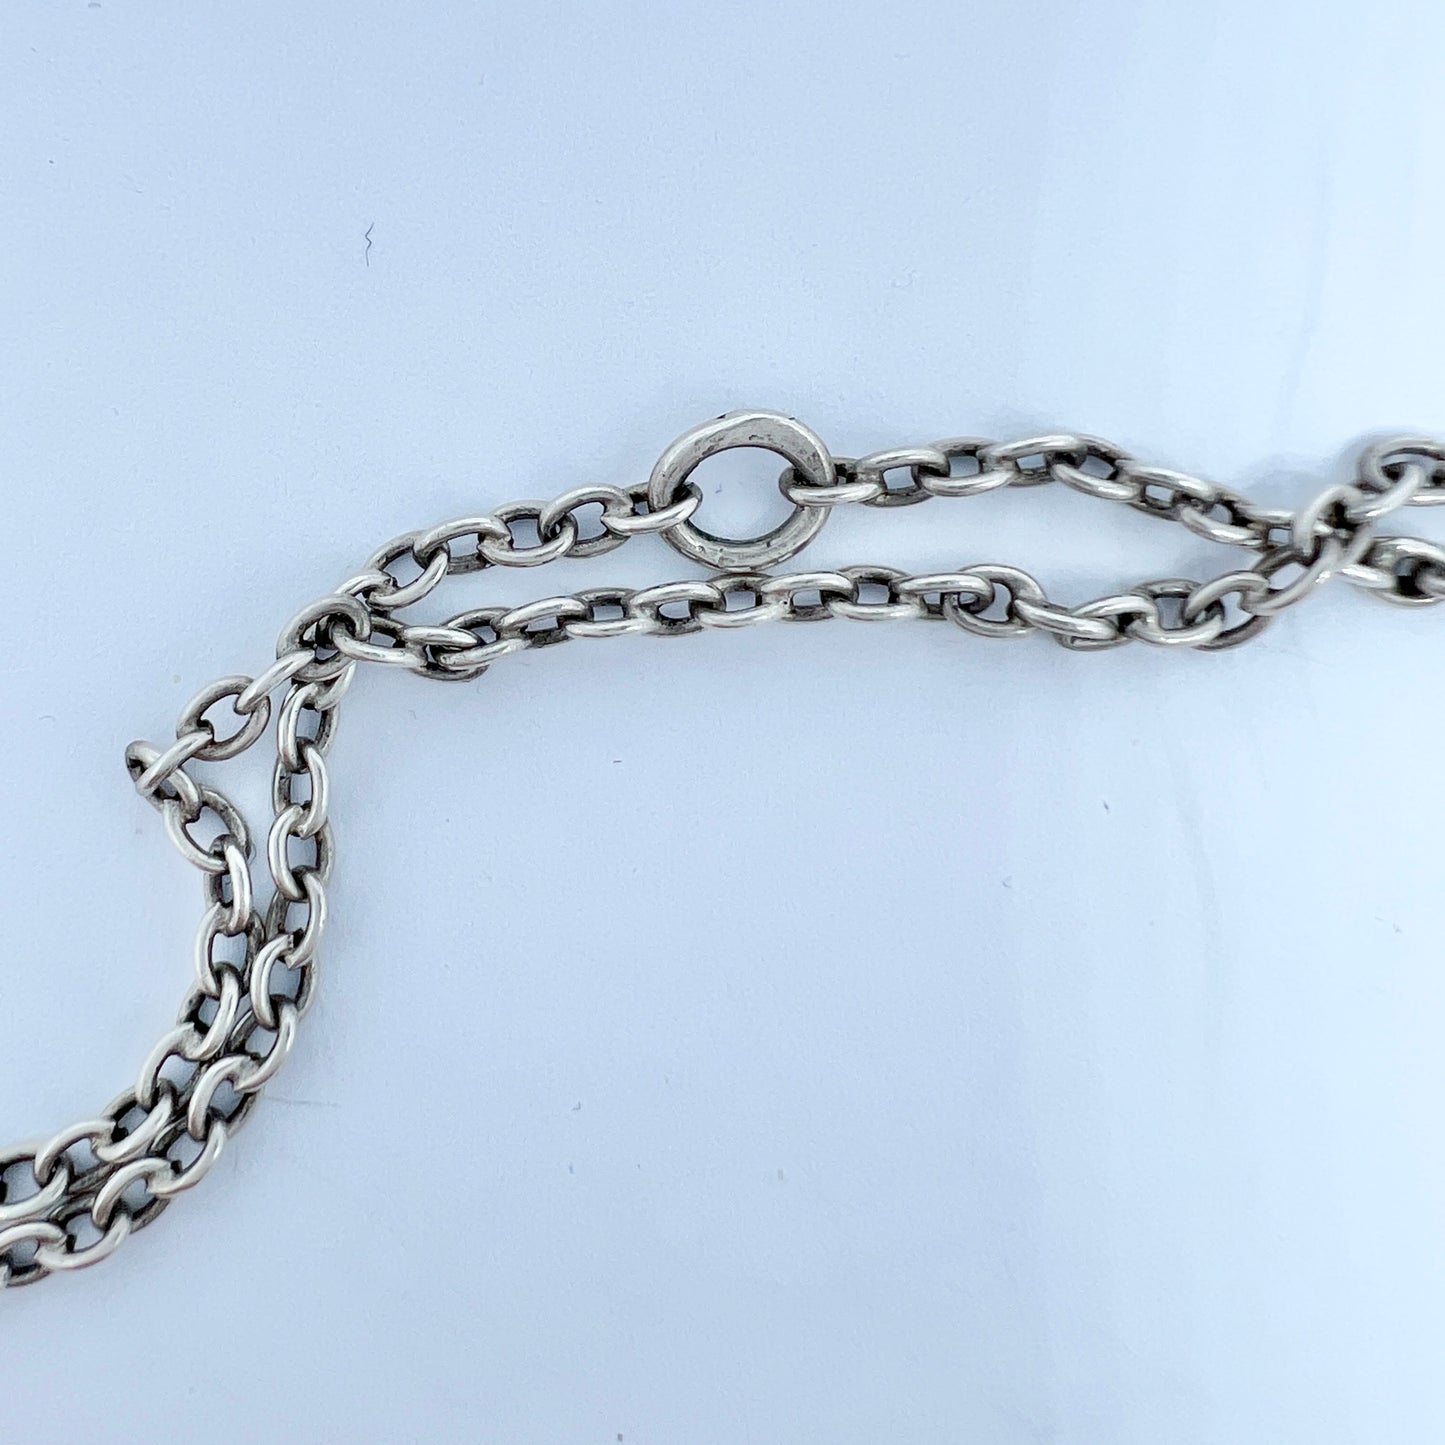 Antique Solid Silver 56 inch Longuard Chain Necklace.